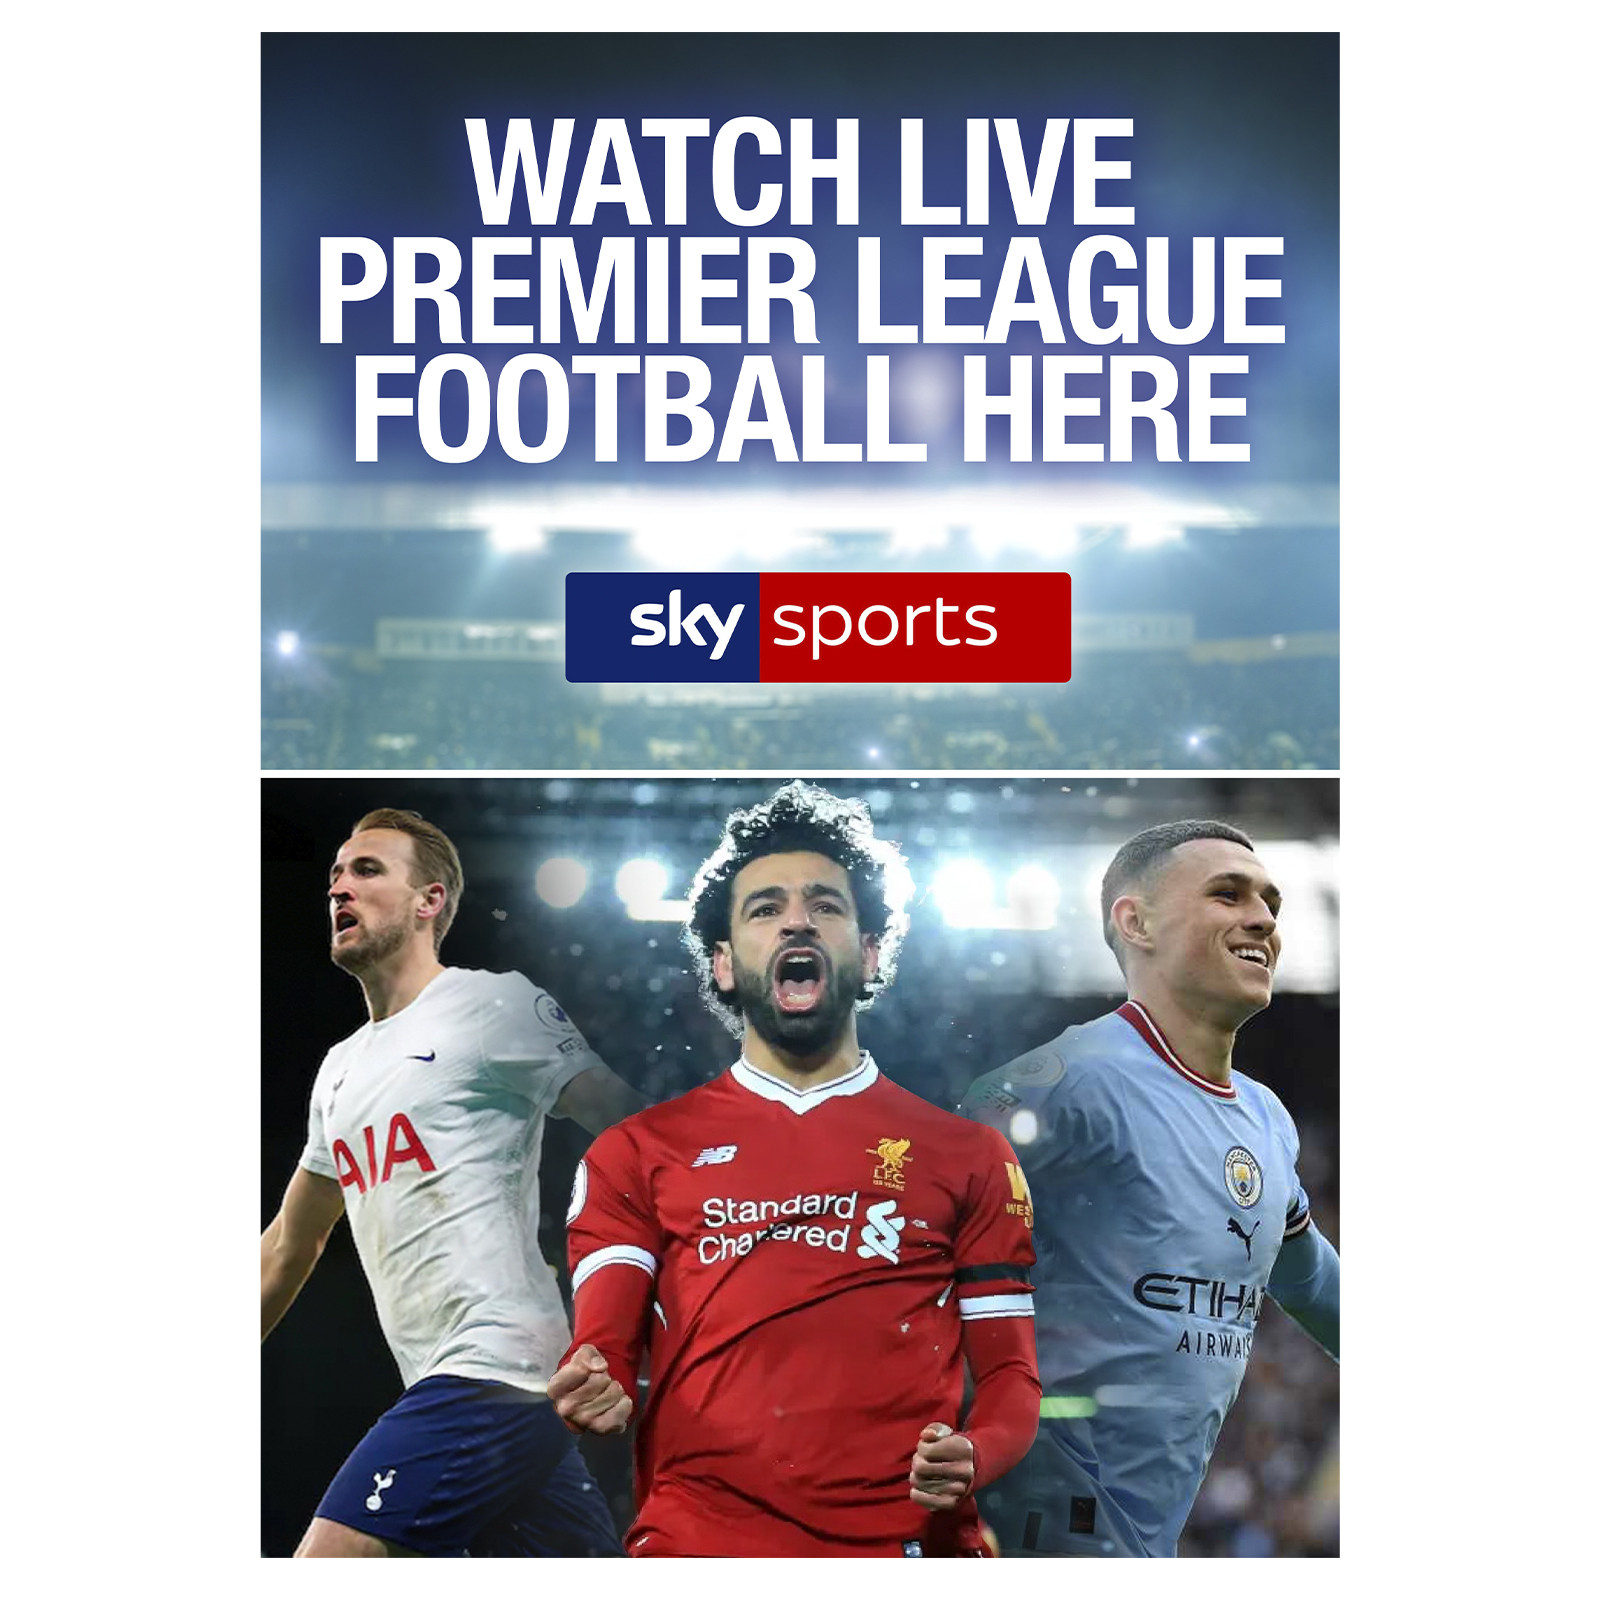 Watch Live Premier League Football Here Poster